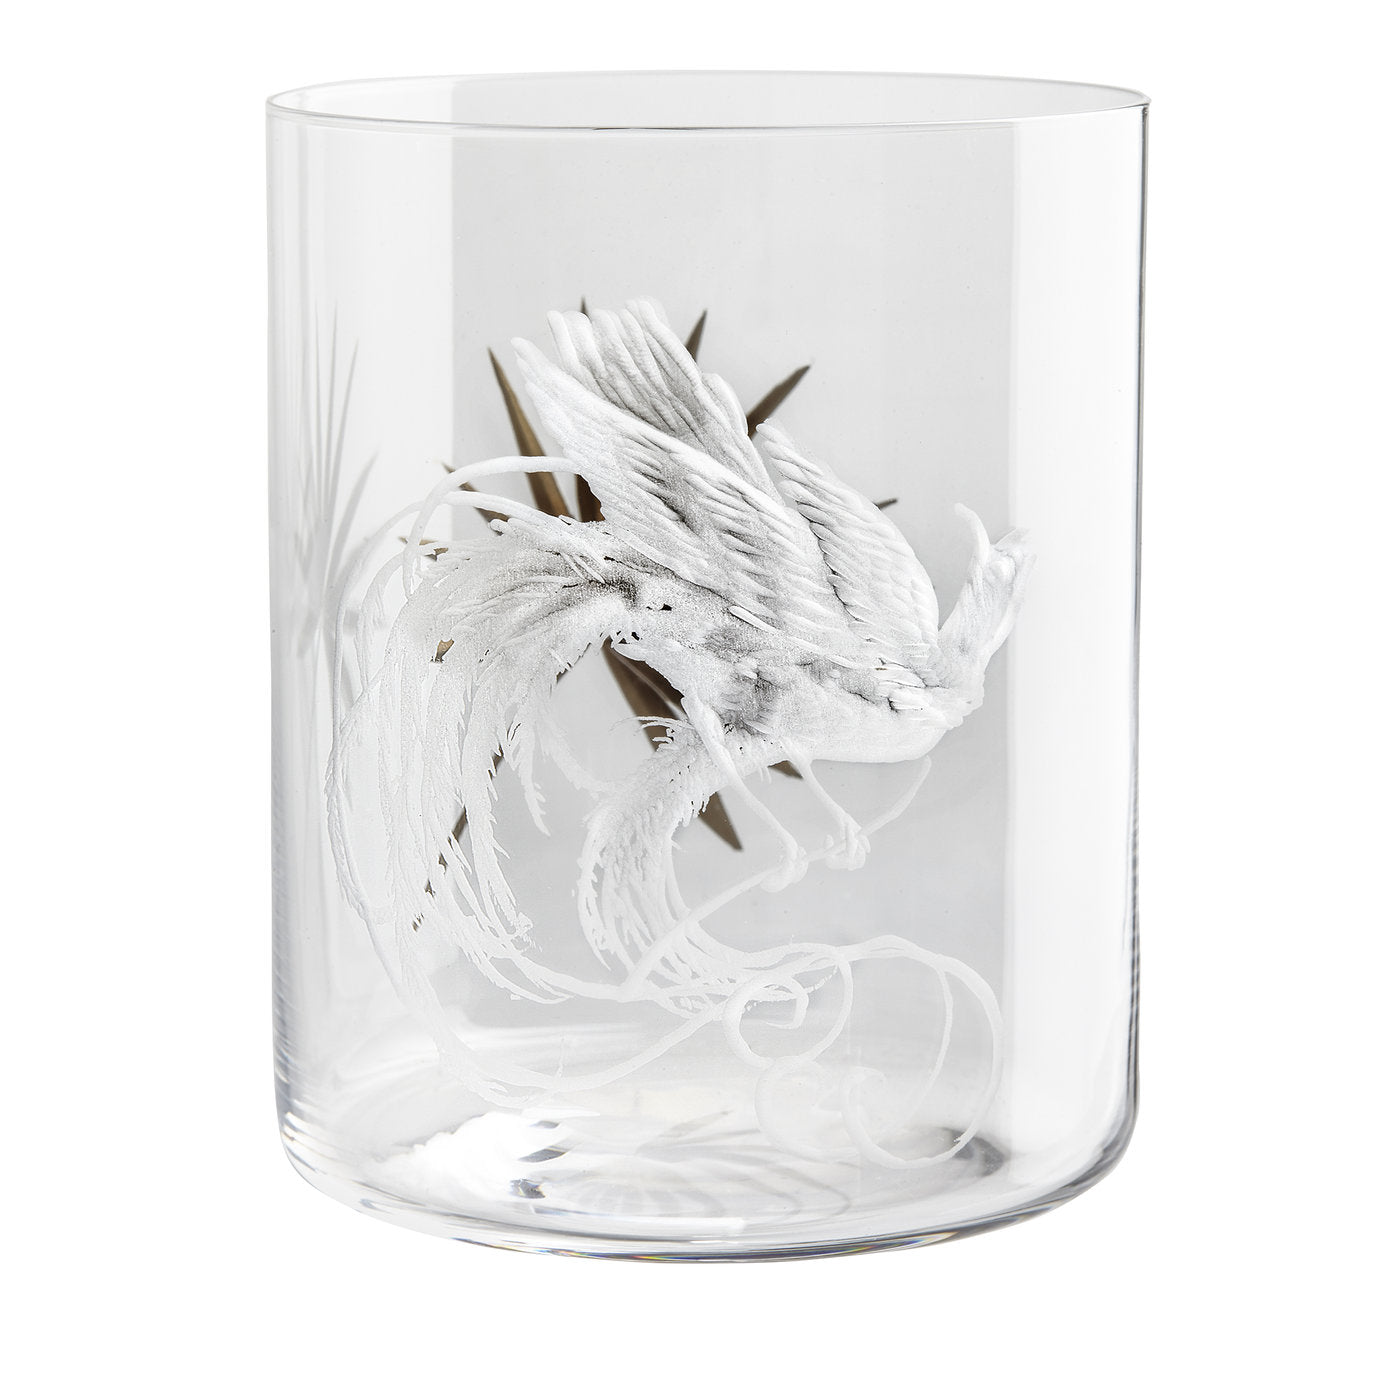 Set of 6 Birds of paradise Crystal Glasses - Alternative view 5